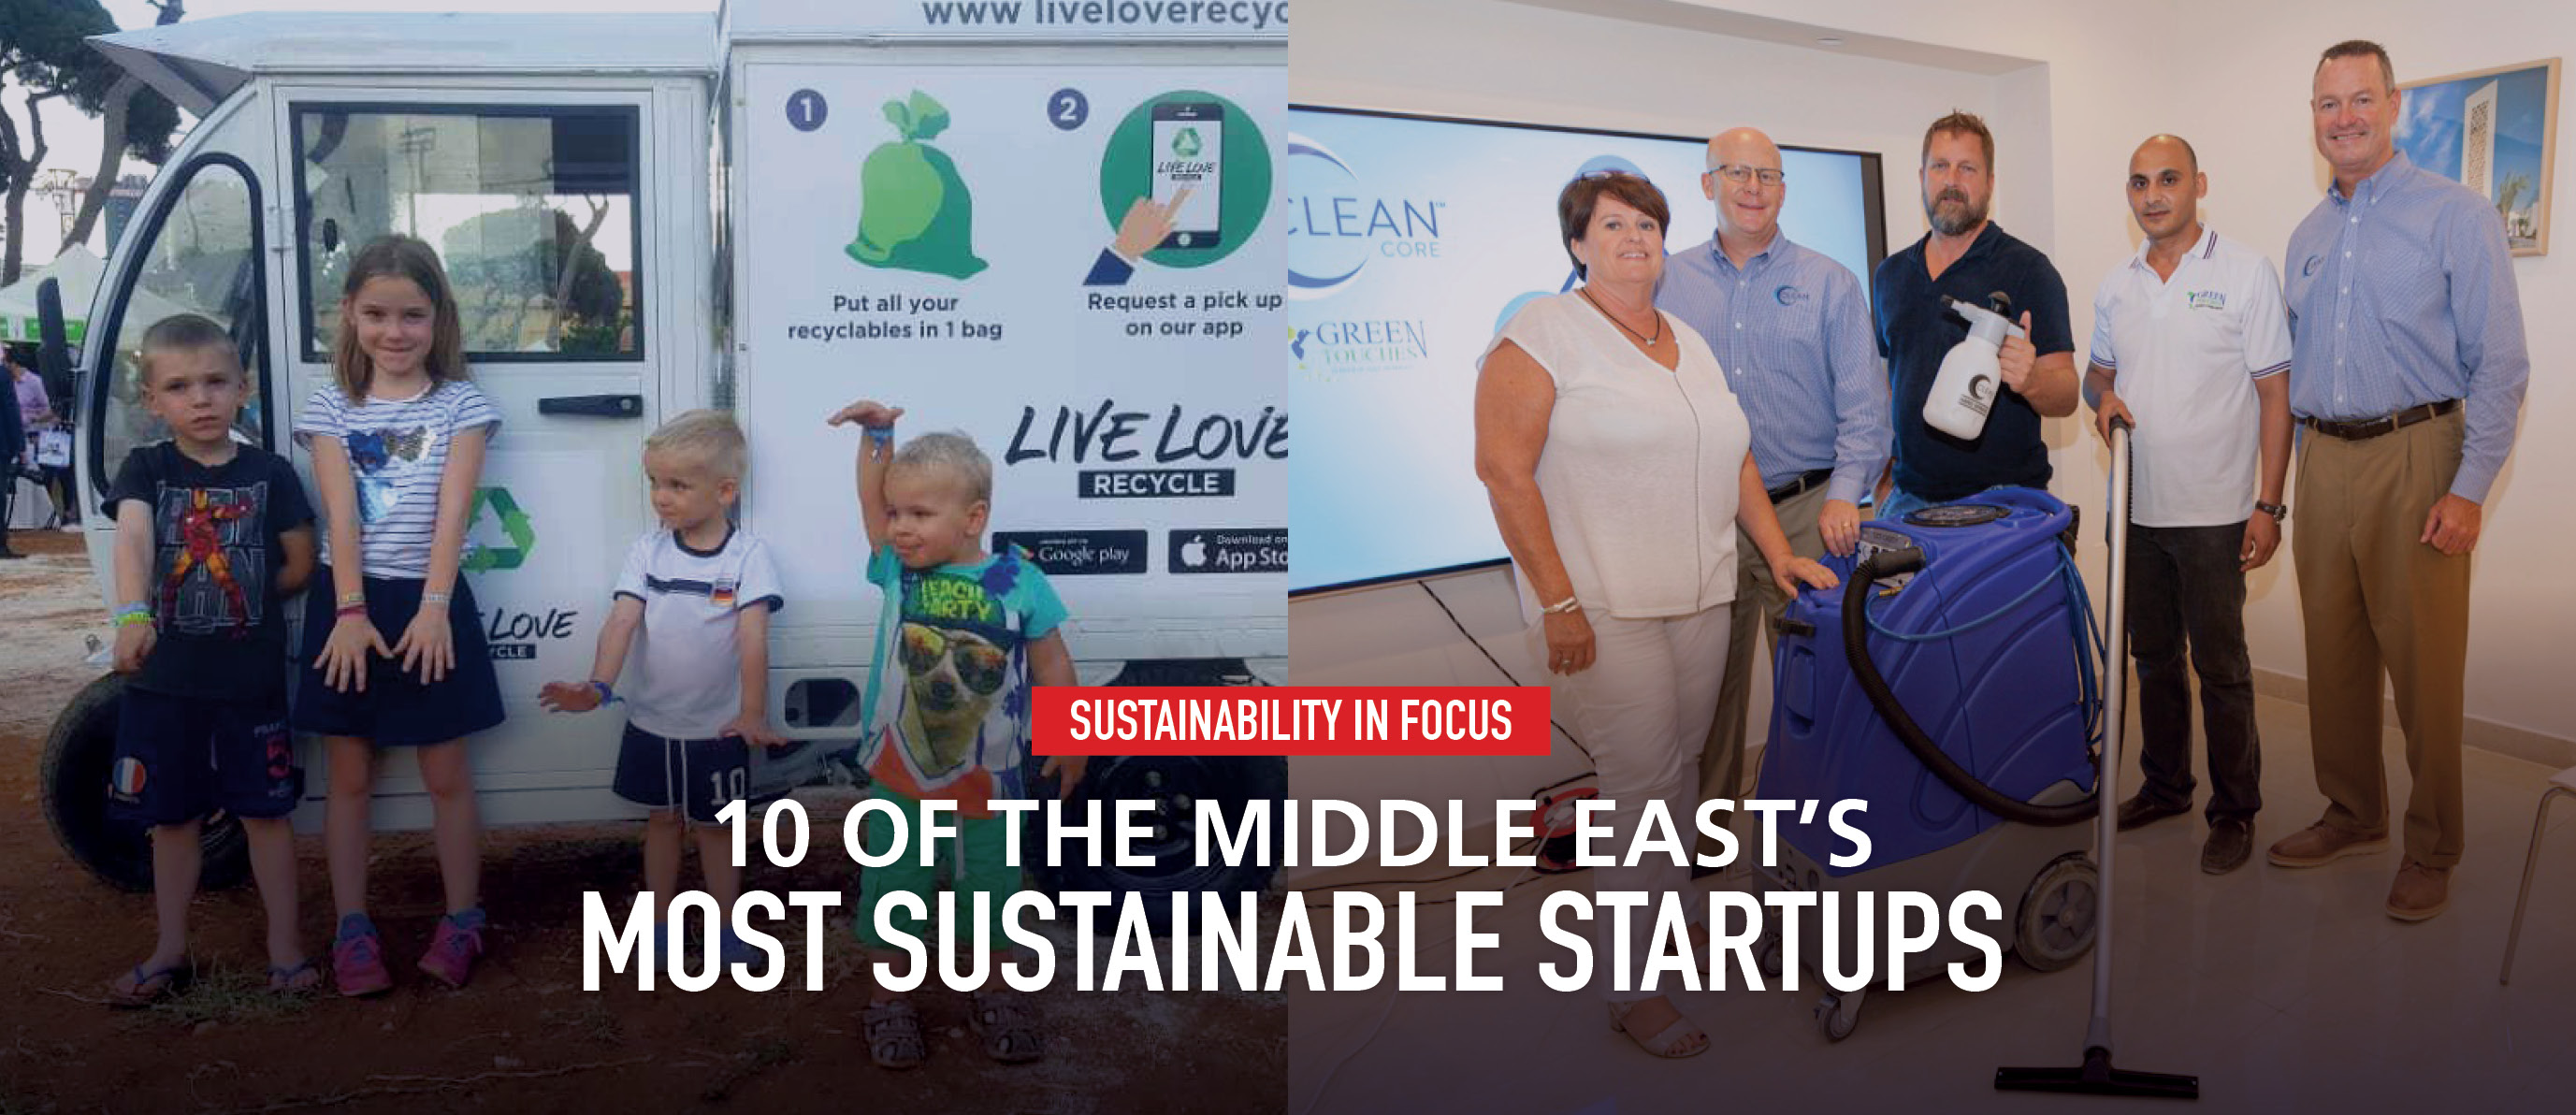 10 of The Middle East’s Most Sustainable Startups